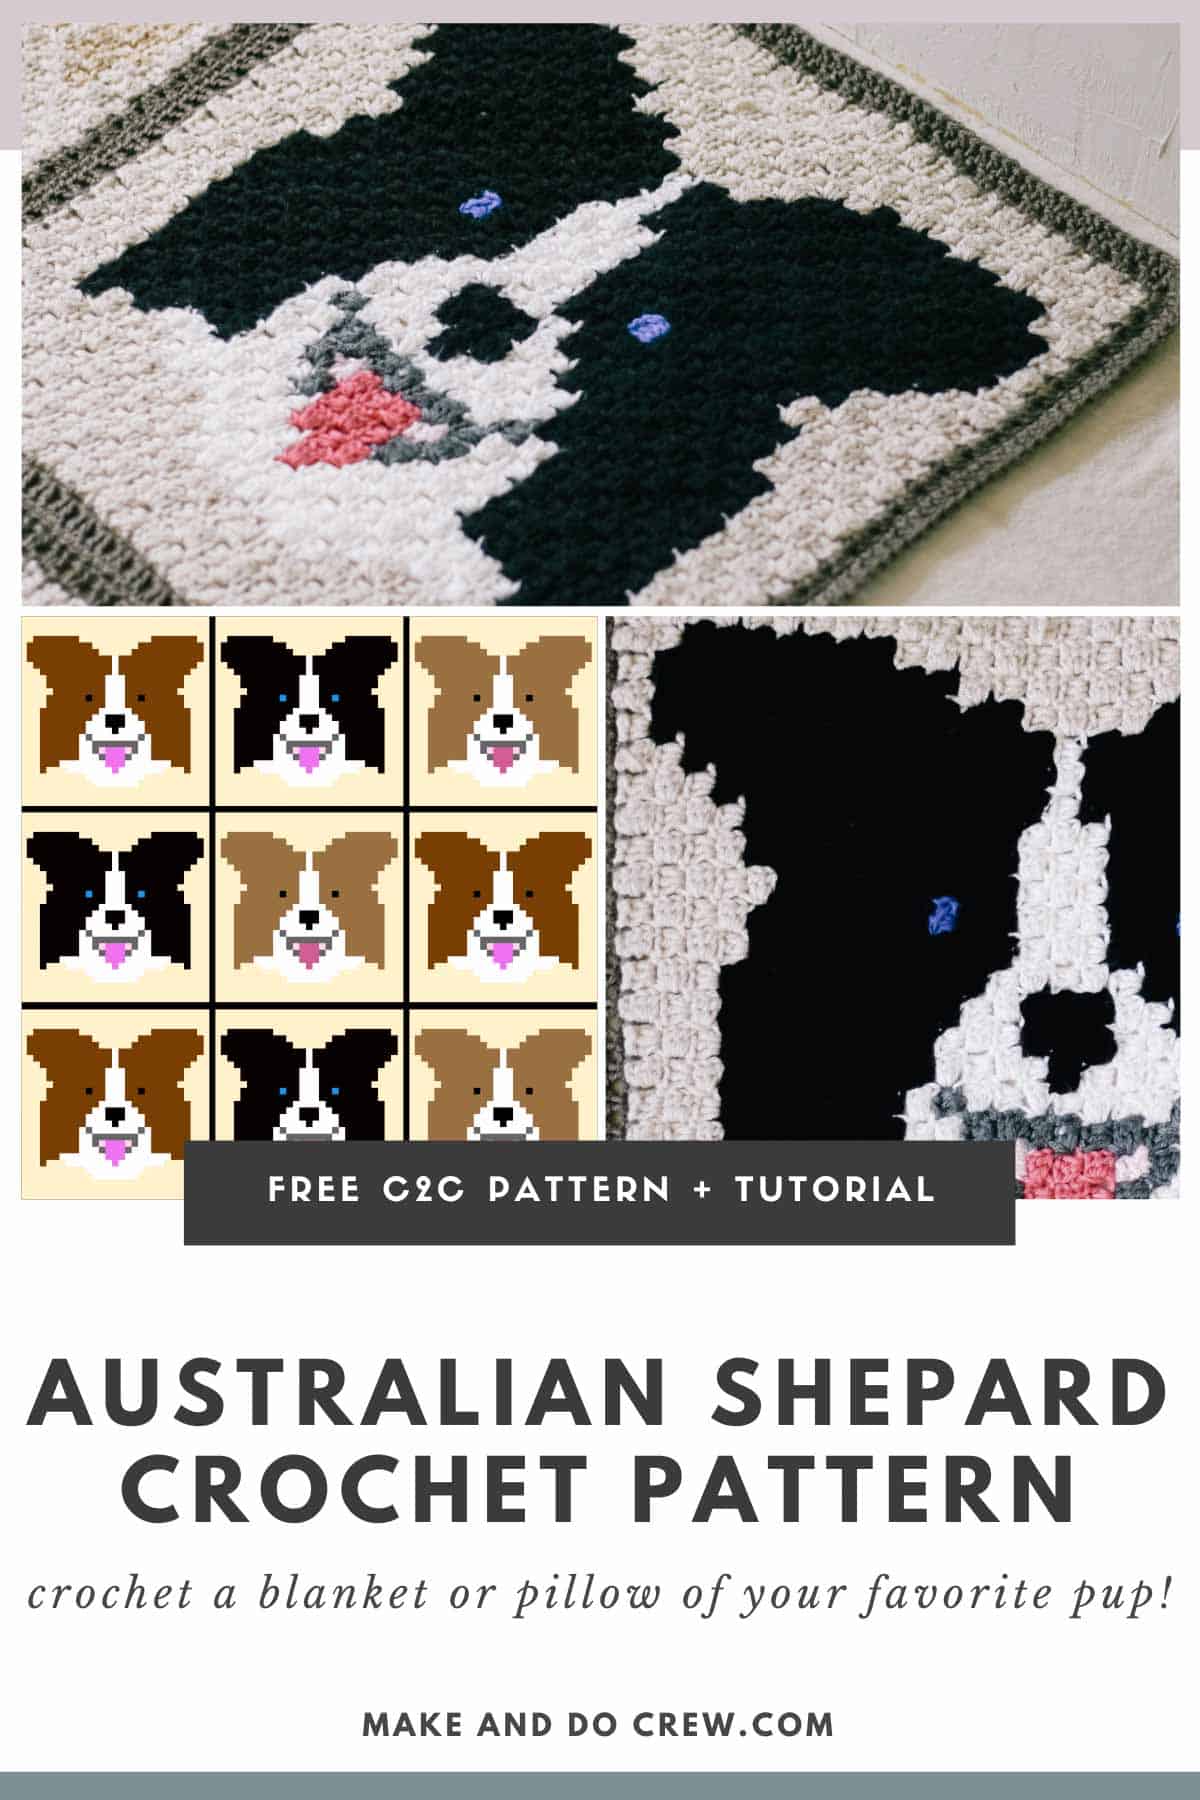 This image shows a free crochet pattern for a dog portrait corner to corner crochet square, featuring an Australian Shepard or a Border Collie.